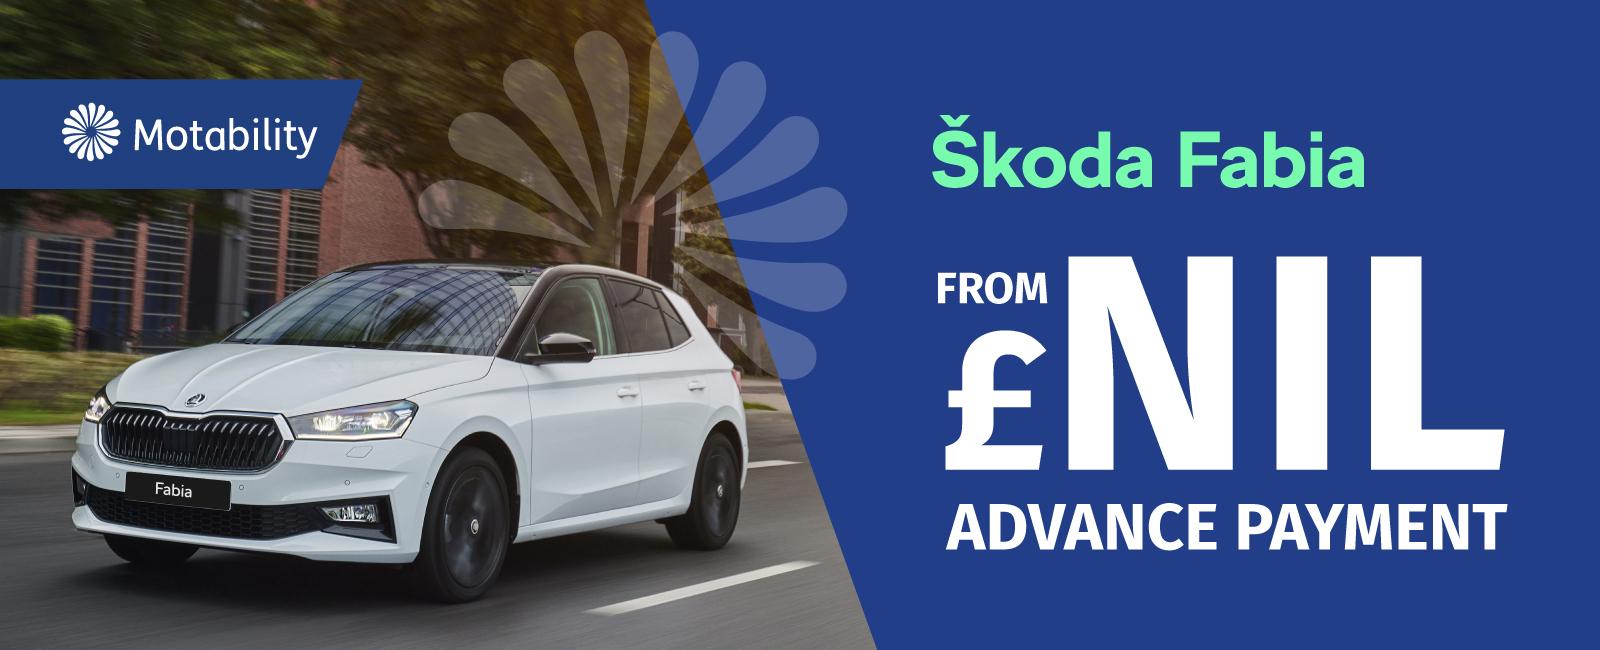 The Skoda Fabia from £NIL advance payment on the Motability Scheme